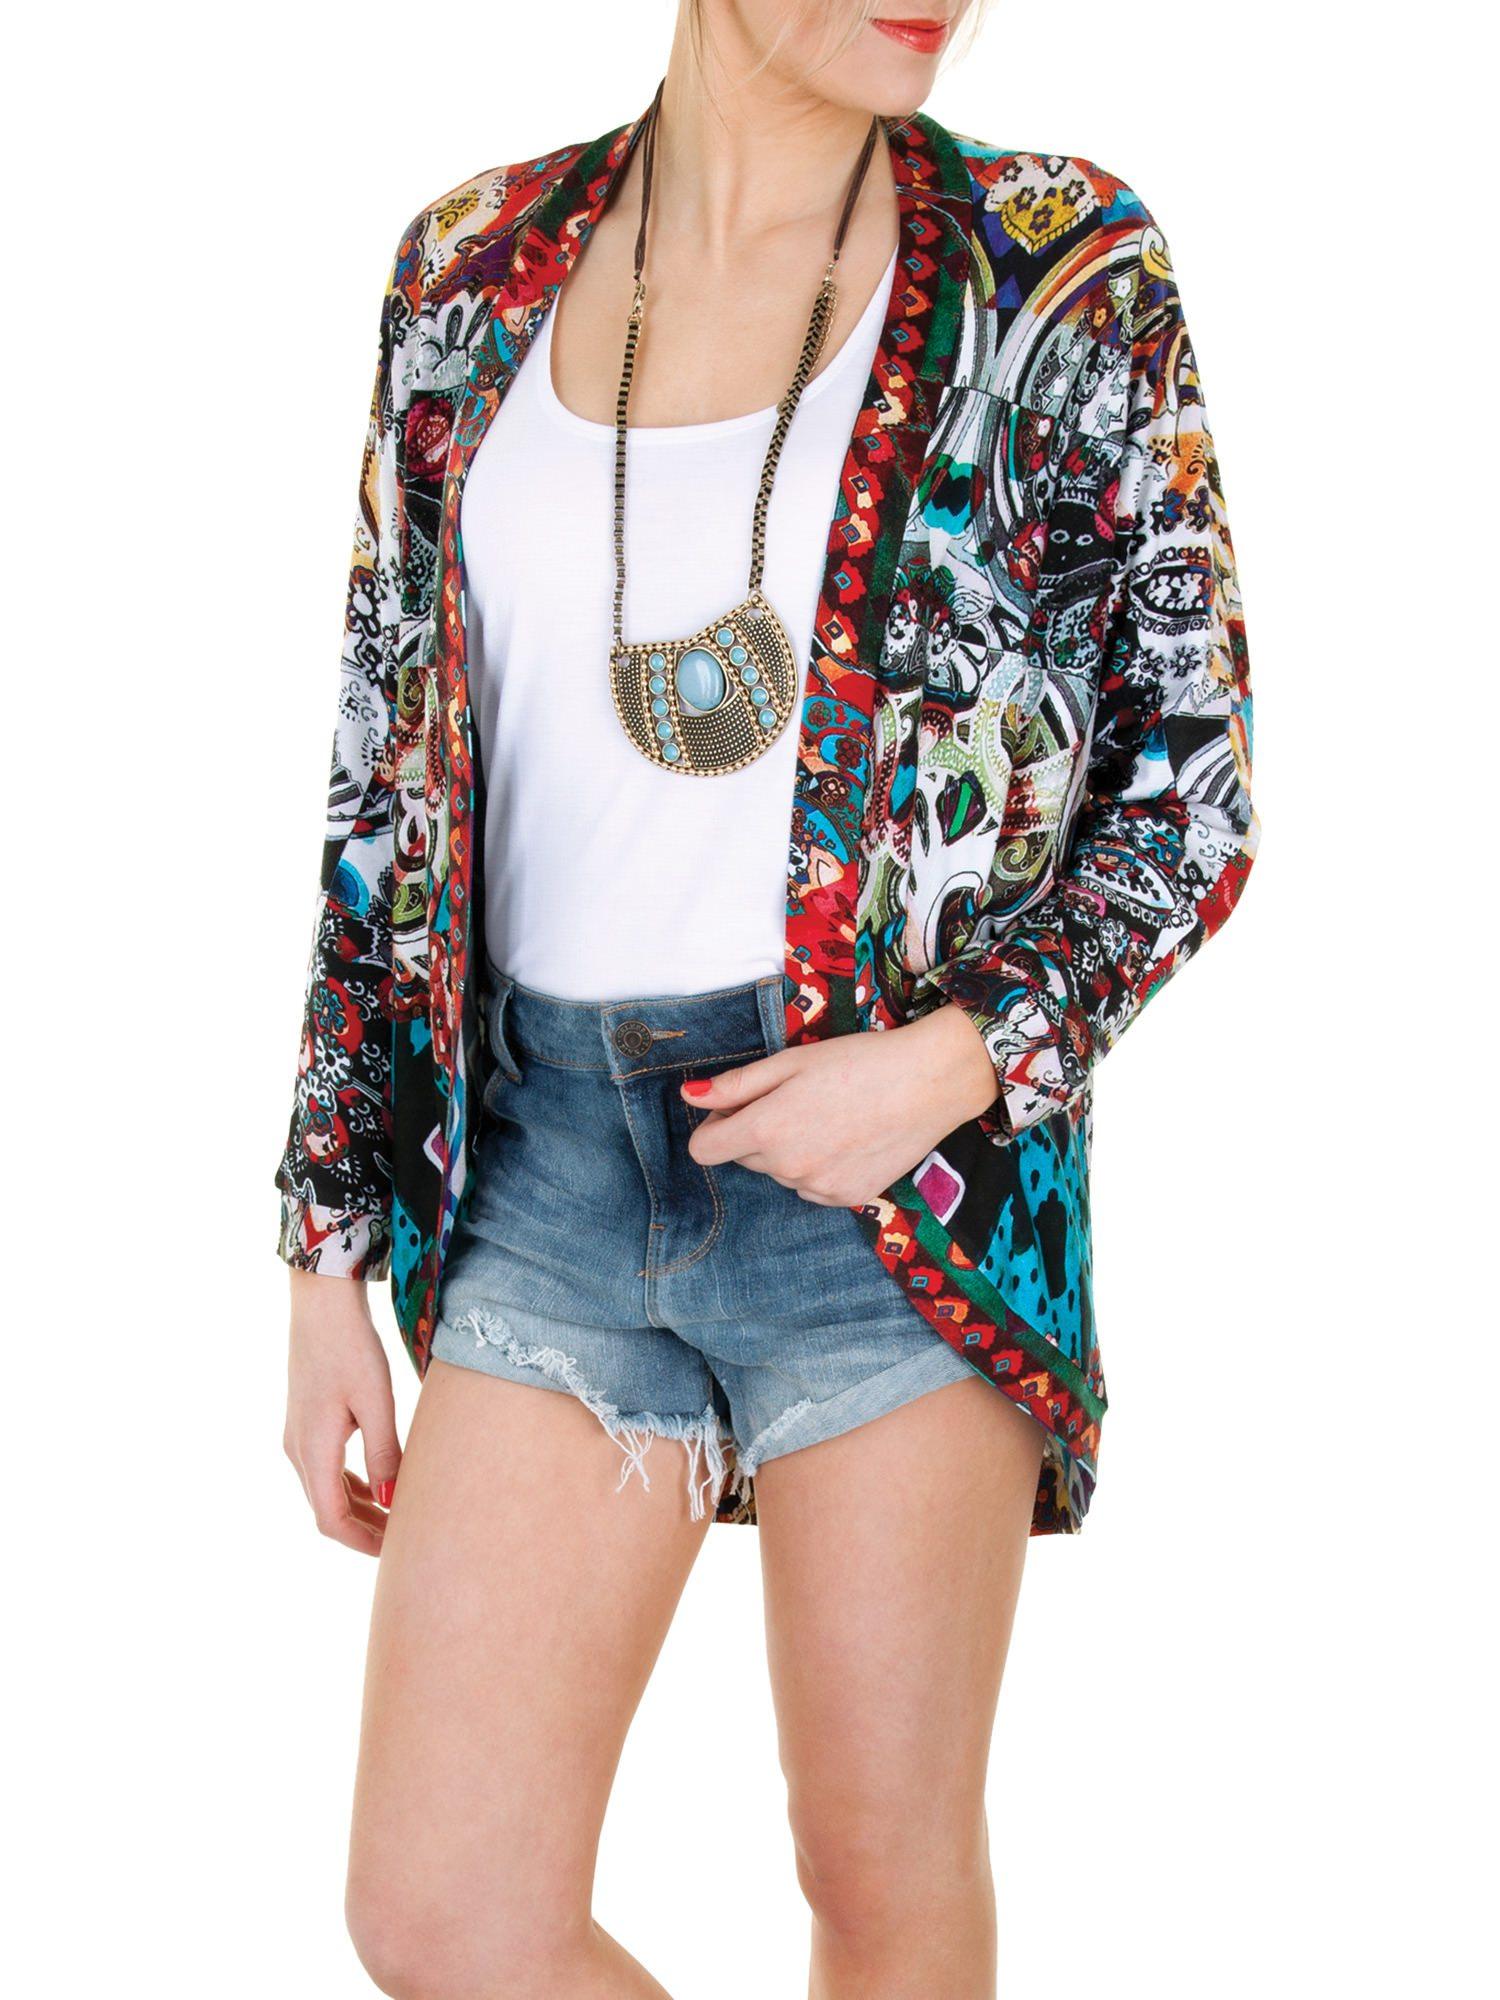 Jalie 3353 - Cocoon cardigan in a colorful printed knit